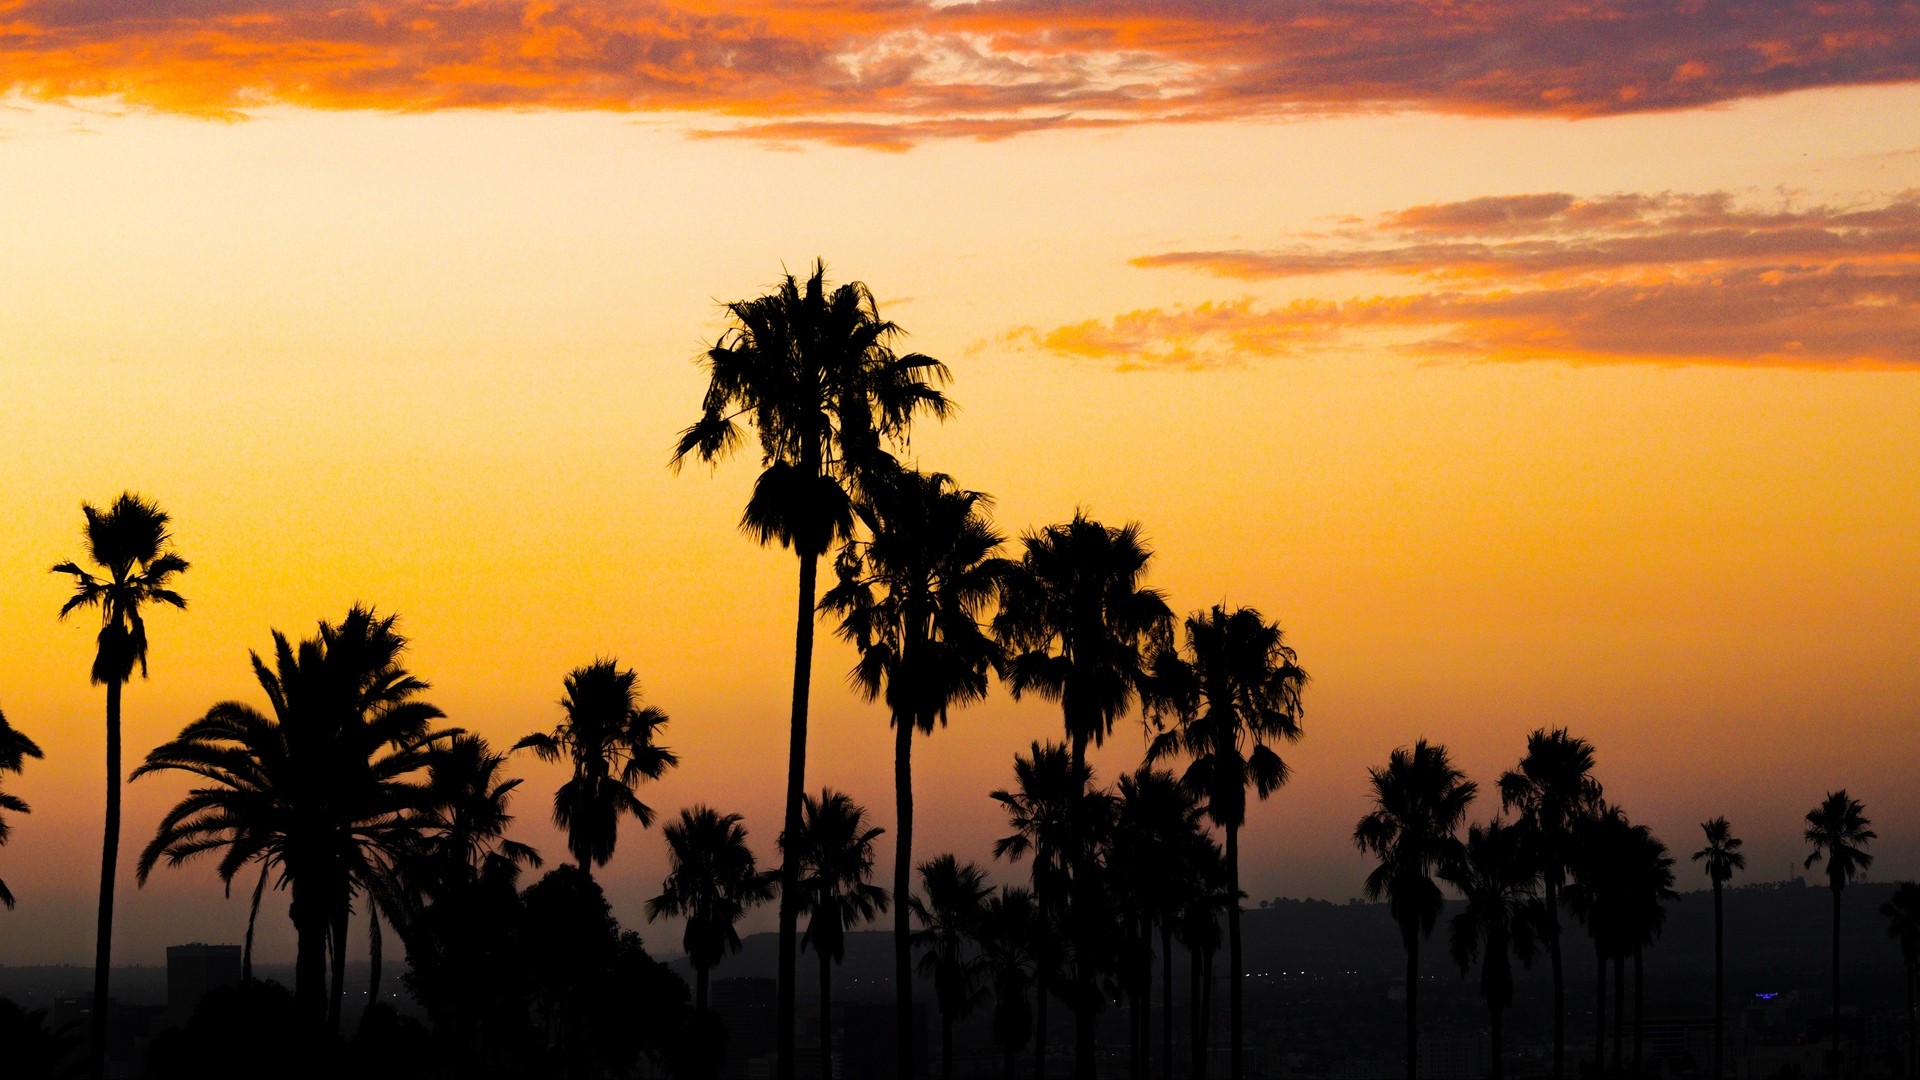 1920x1080 wallpapers: palm trees, sunset, clouds, twilight (image)